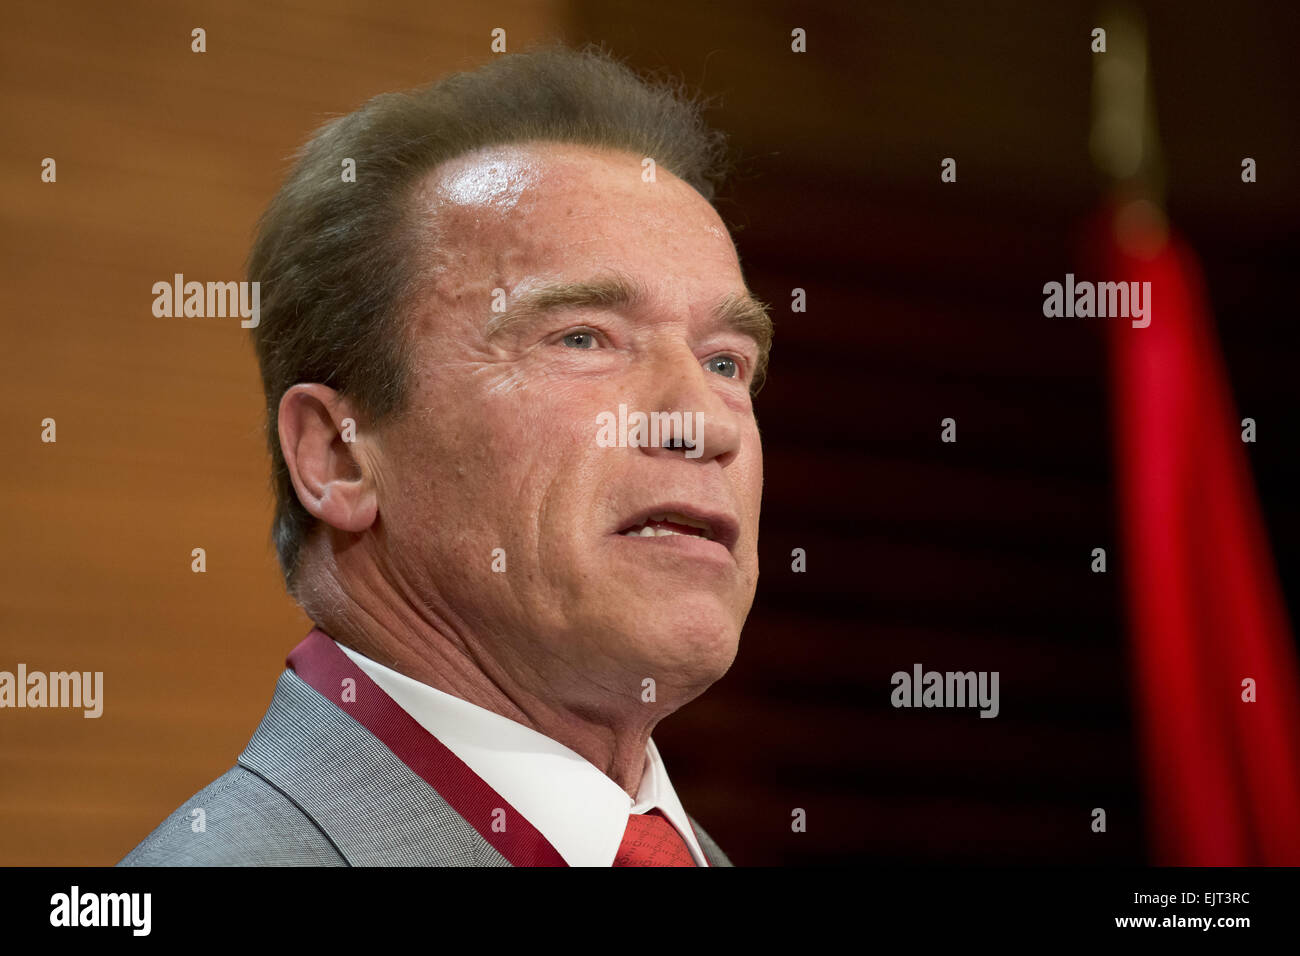 Arnold Schwarzenegger receives a medal honouring him as Tourism Ambassador for Madrid, for his contribution to the promotion of the city Featuring: Arnold Schwarzenegger Where: Madrid, Spain When: 26 Sep 2014 Stock Photo